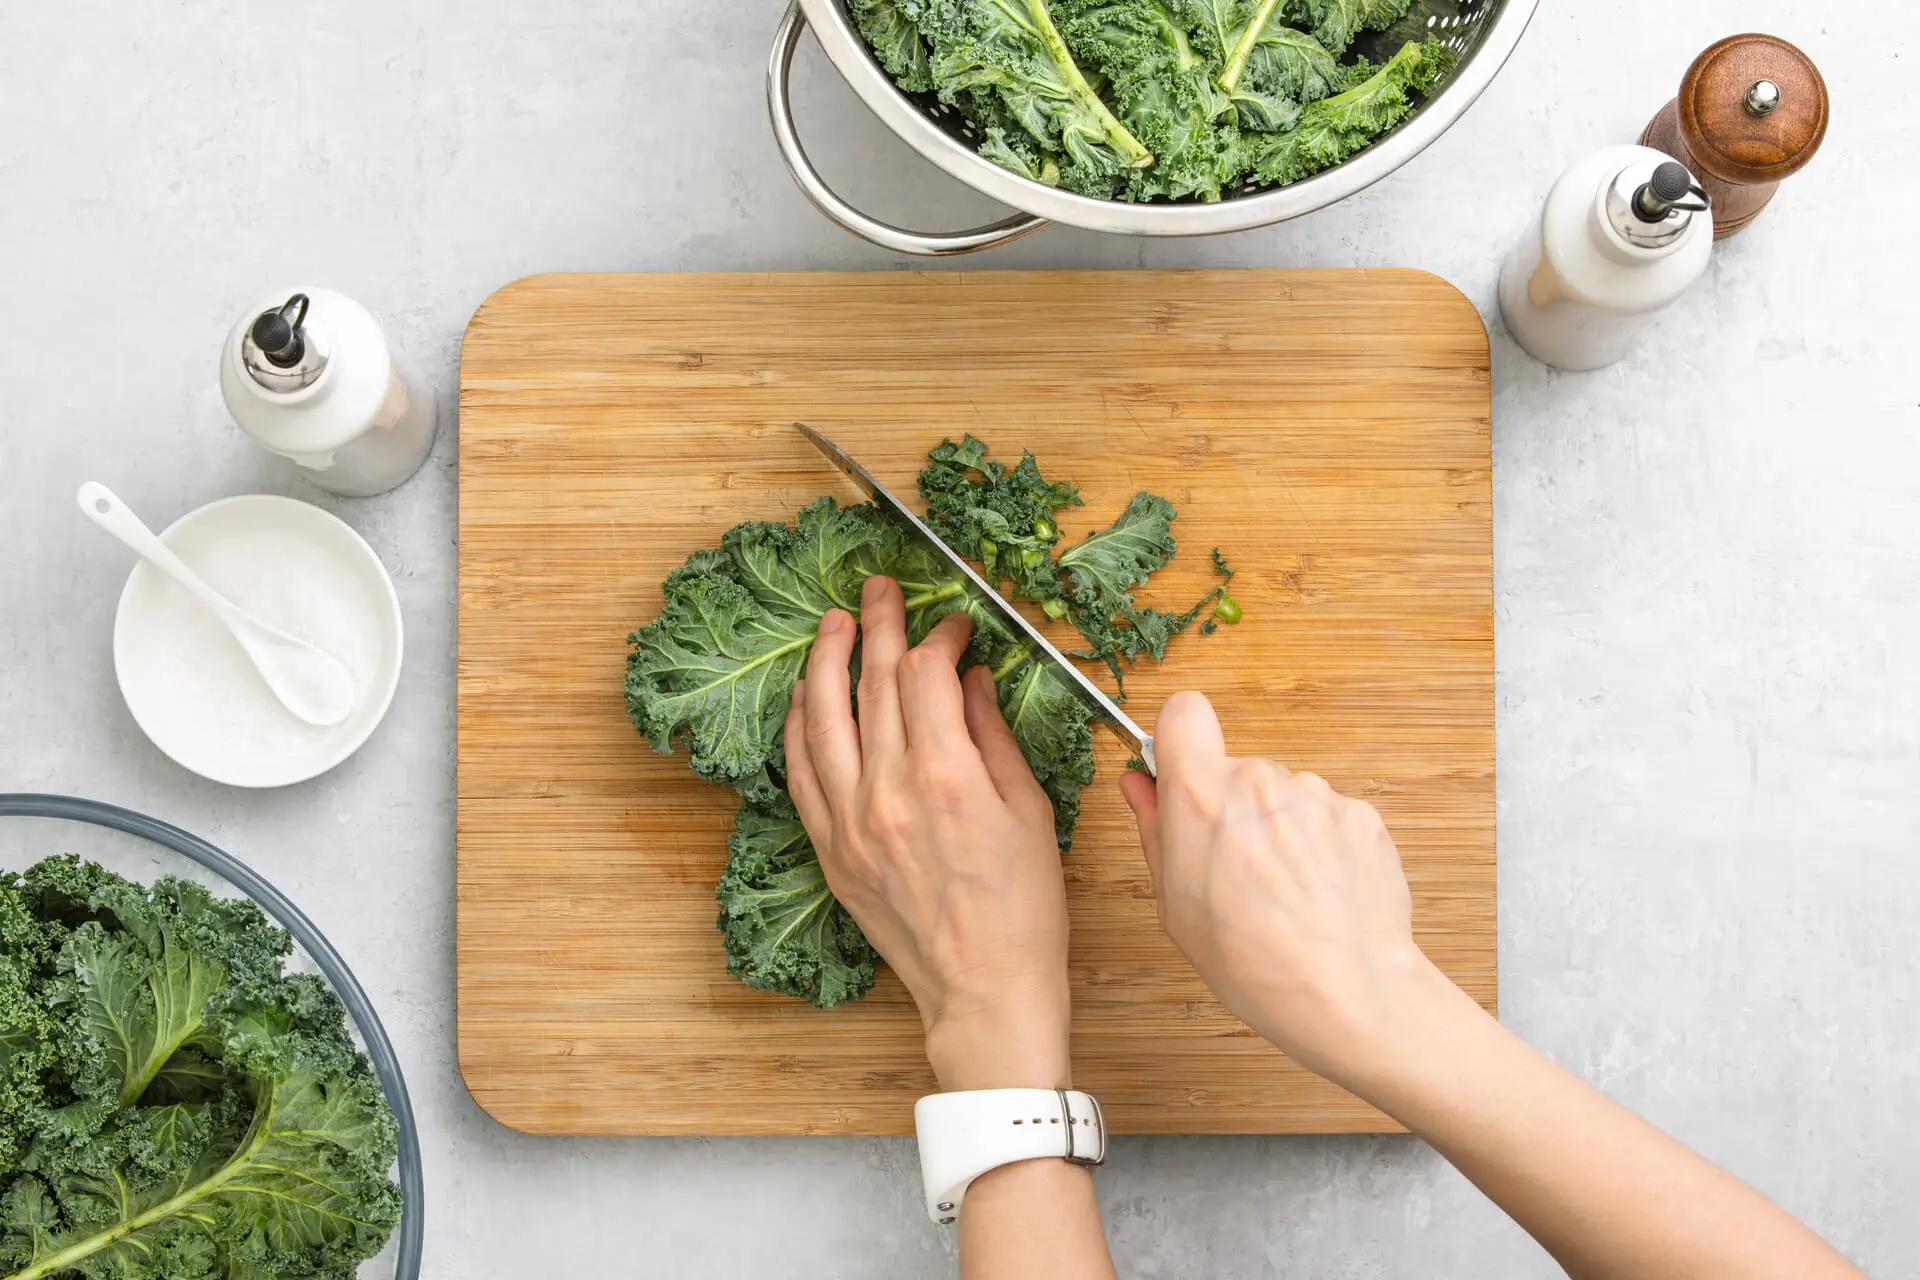 Fresh kale leaves are cut by woman's hands on a cutting board